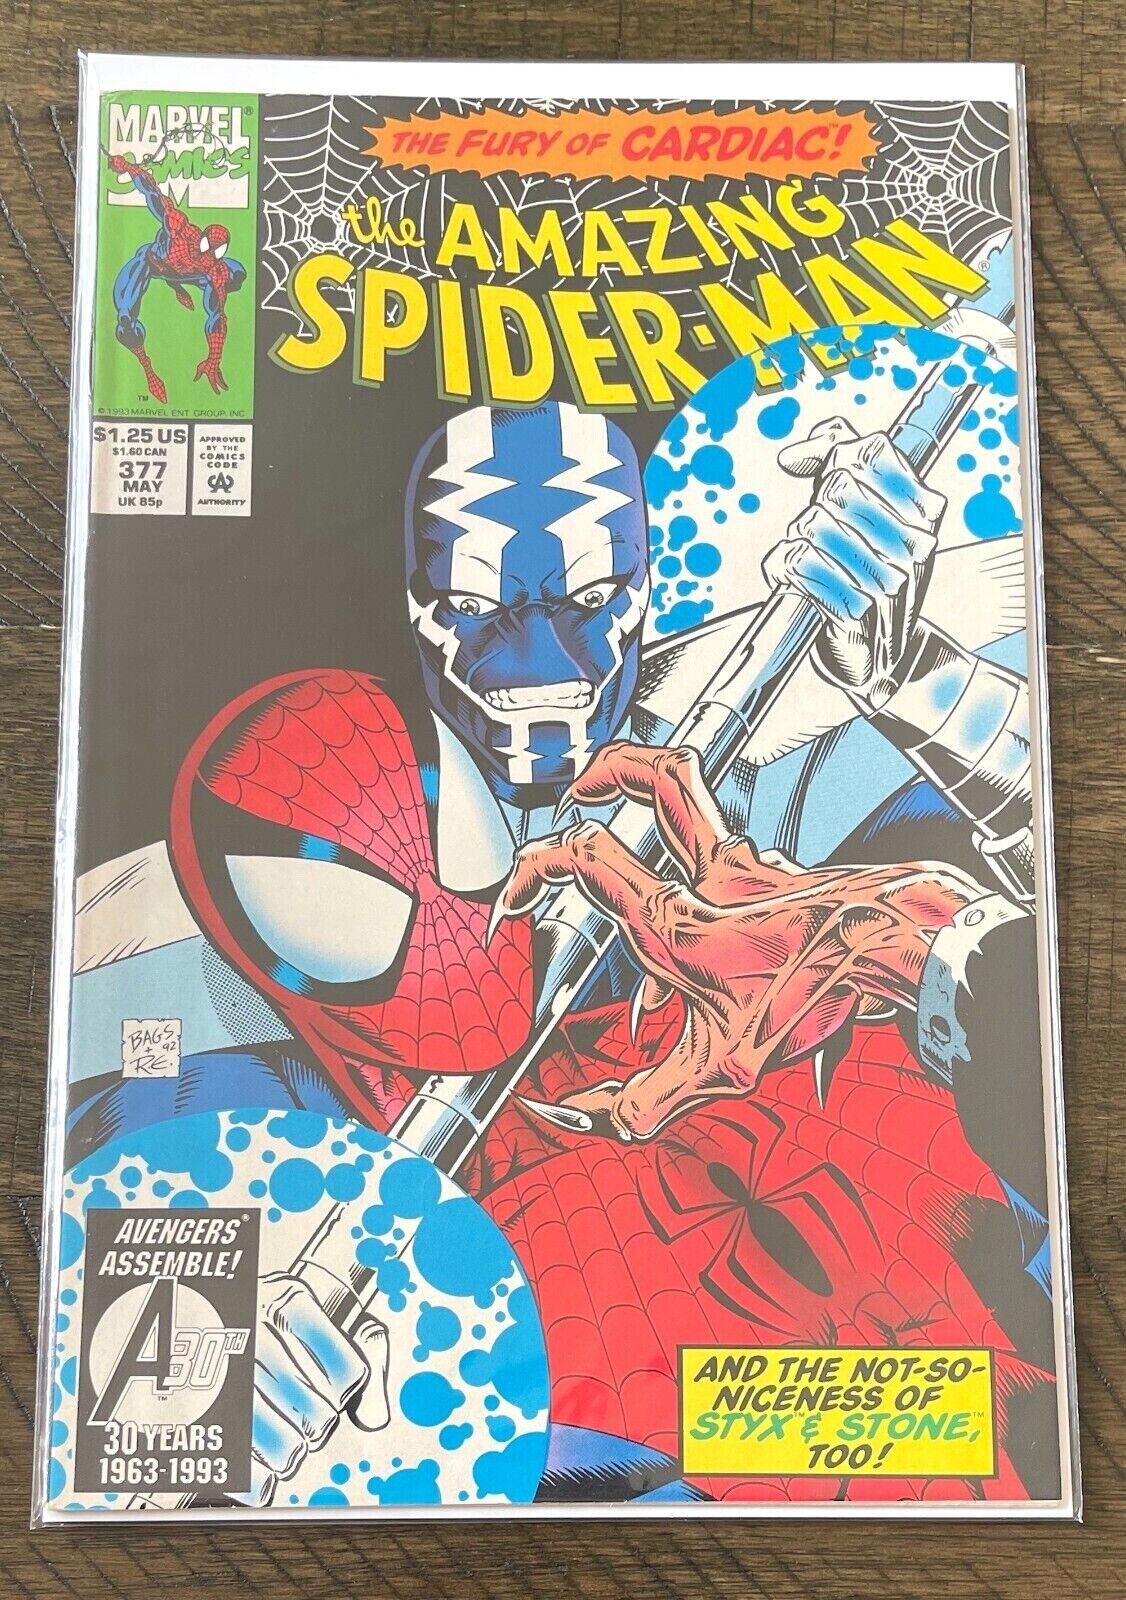 The Amazing Spider-Man #377 (x15) - Fury of Cardiac - Bags and Boards Included